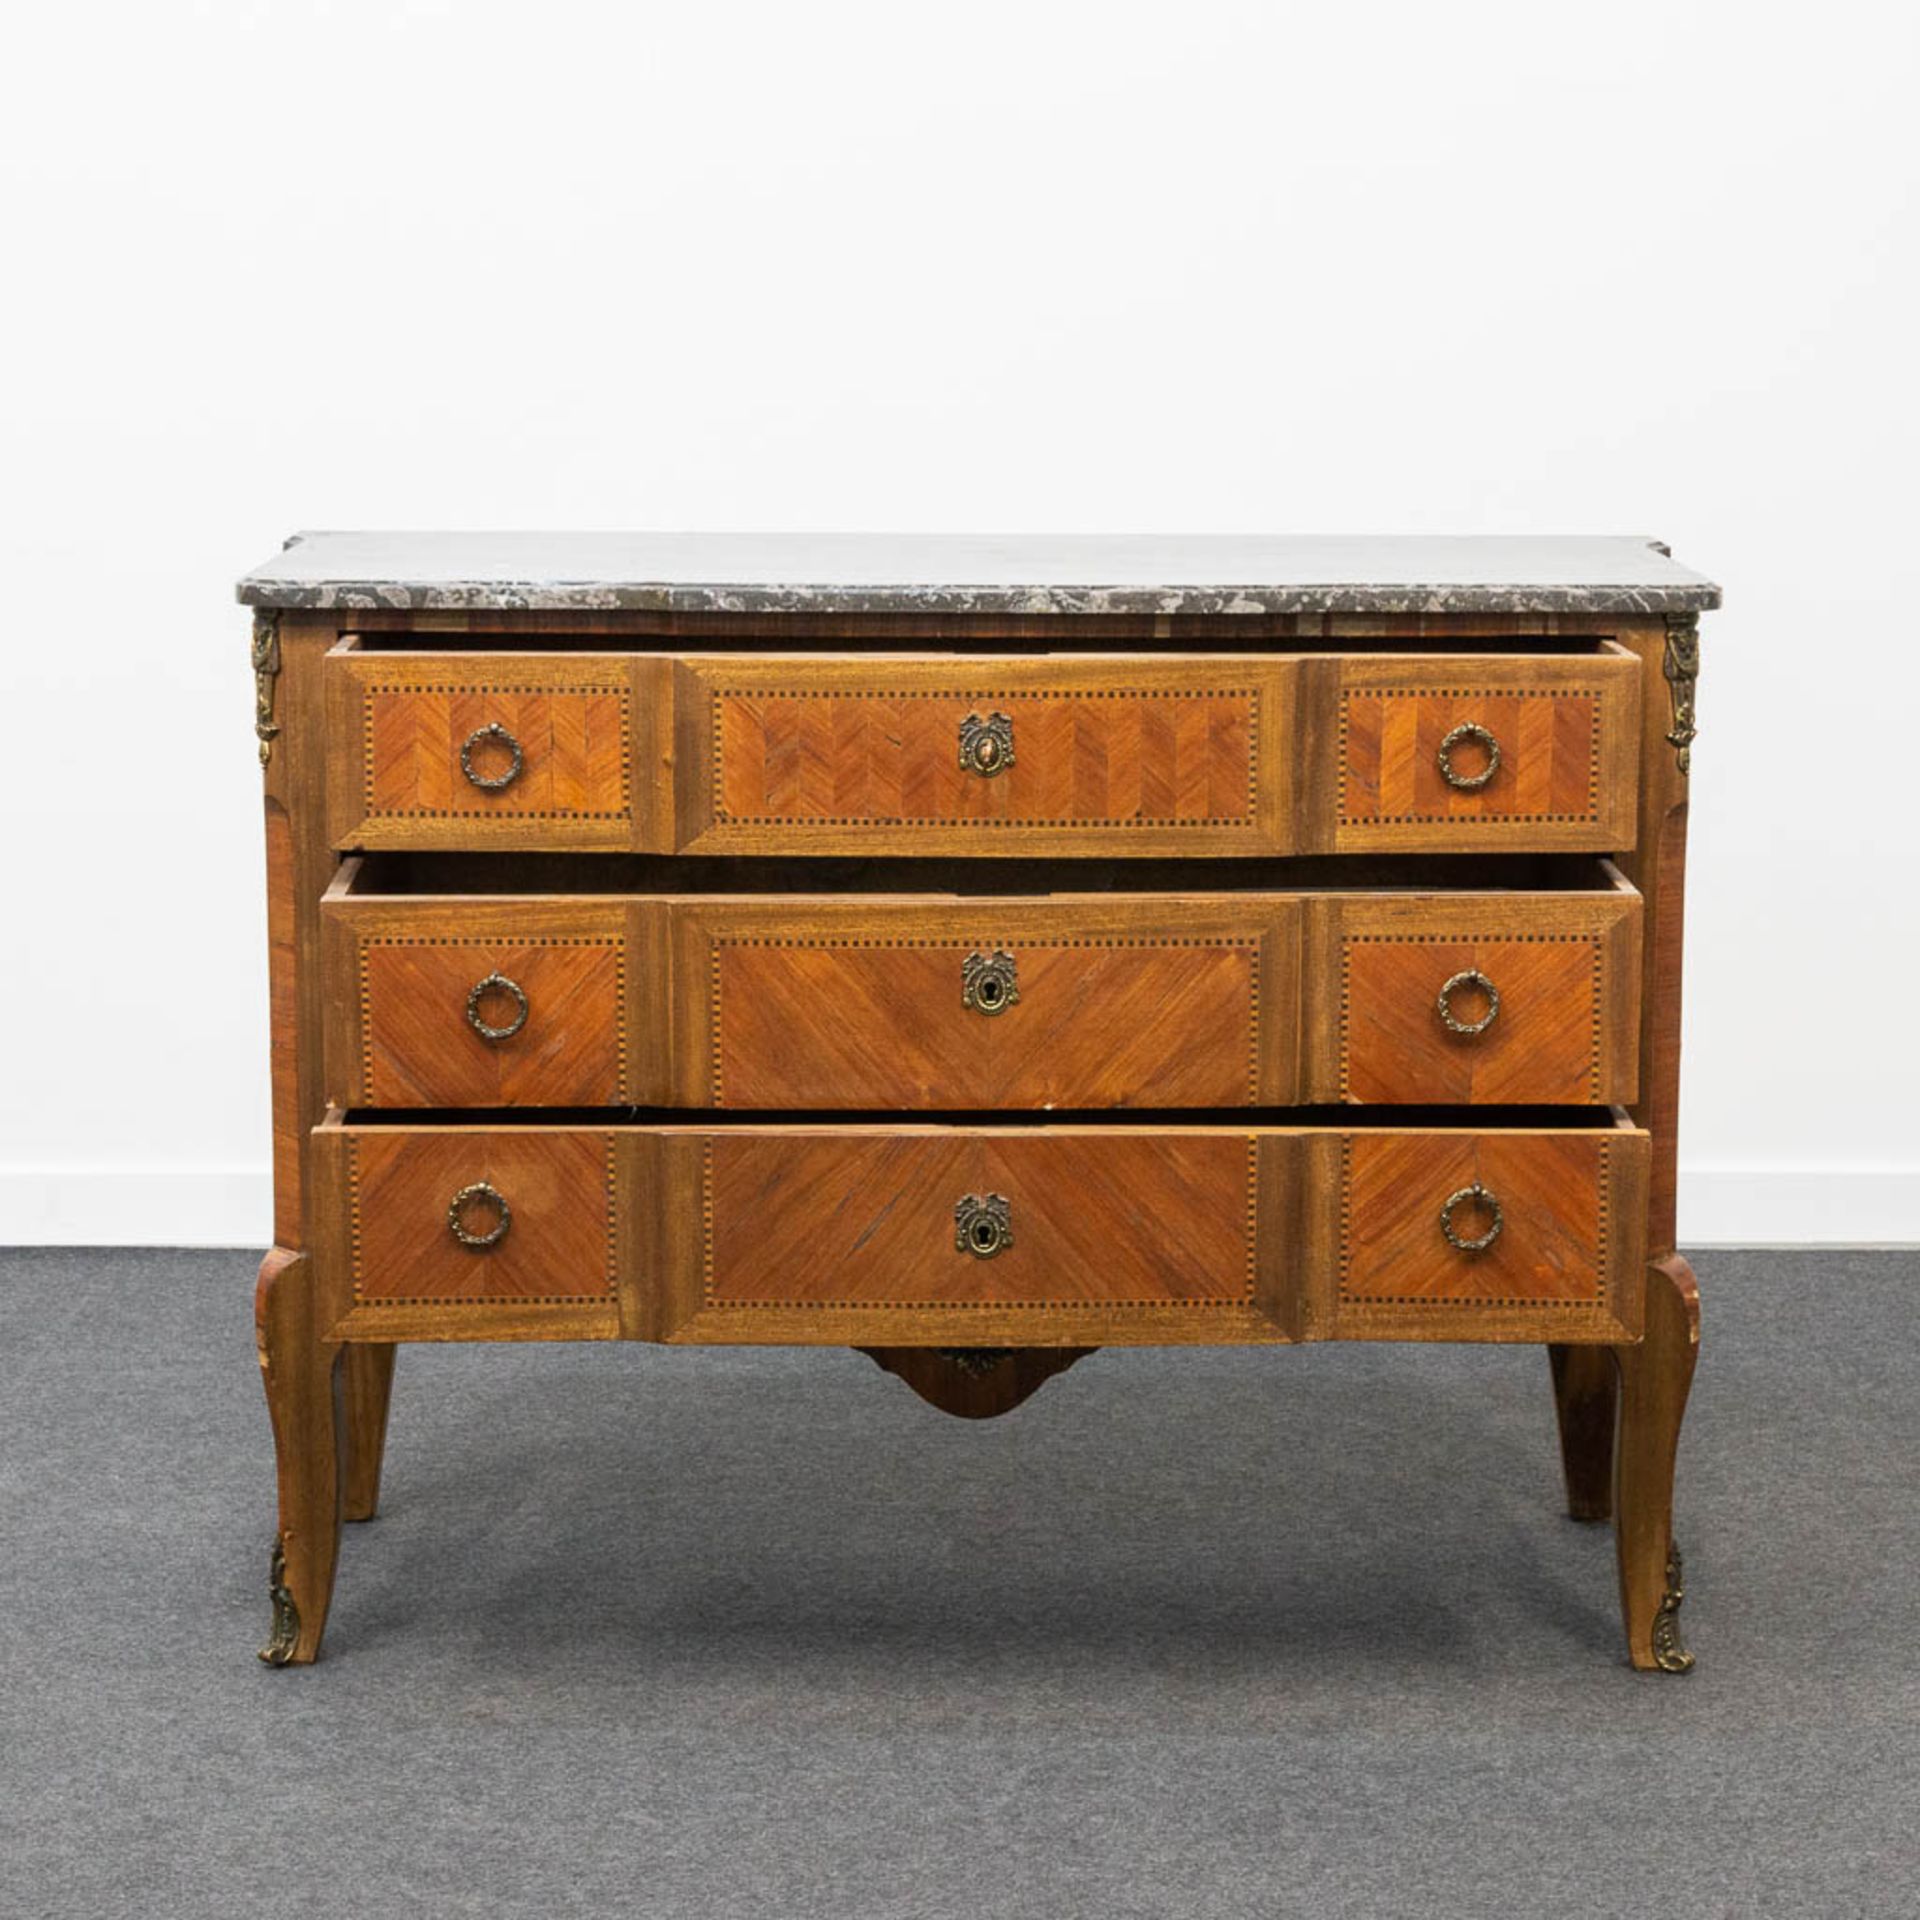 A bronze mounted 3-drawer commode with marble top. - Image 4 of 19